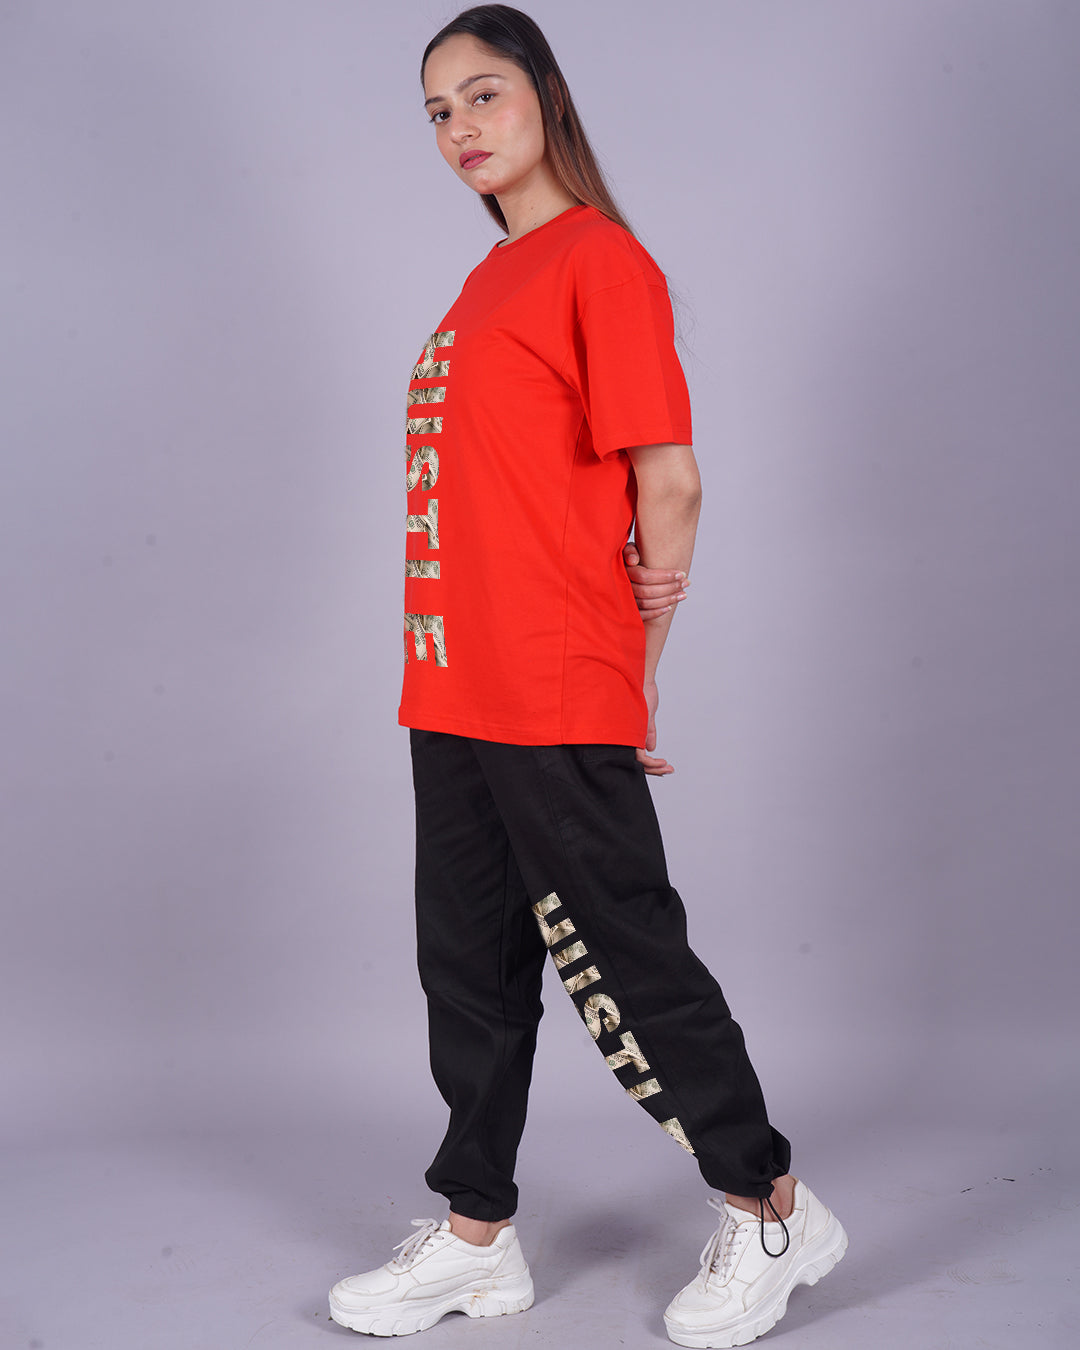 Women Hustle Oversized Co-Ord Set - Red and Black